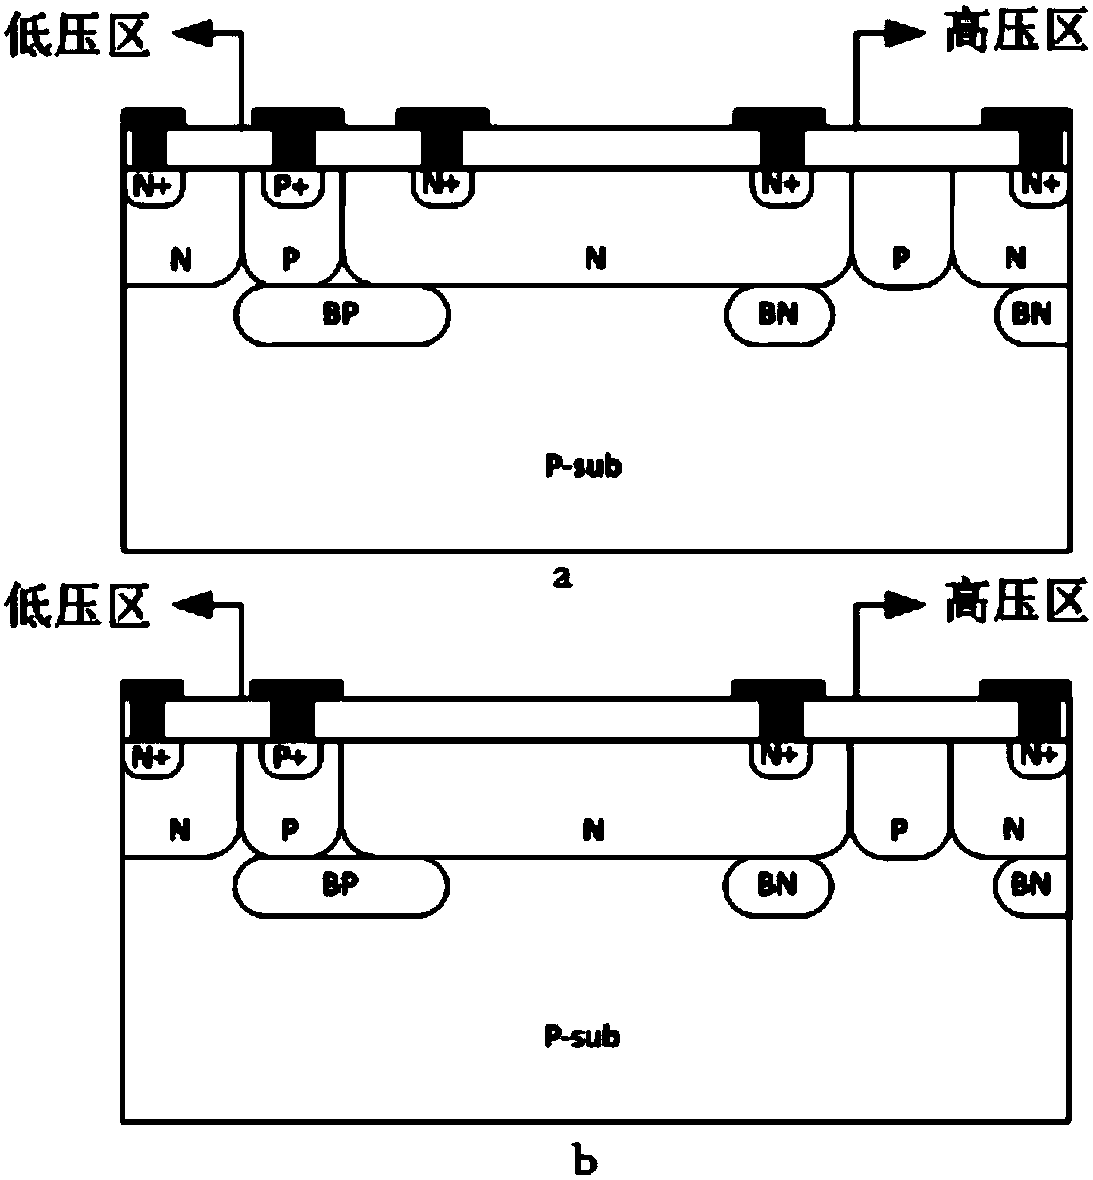 Bootstrap structure integrated to high-and-low-voltage isolation structure and bootstrap circuit